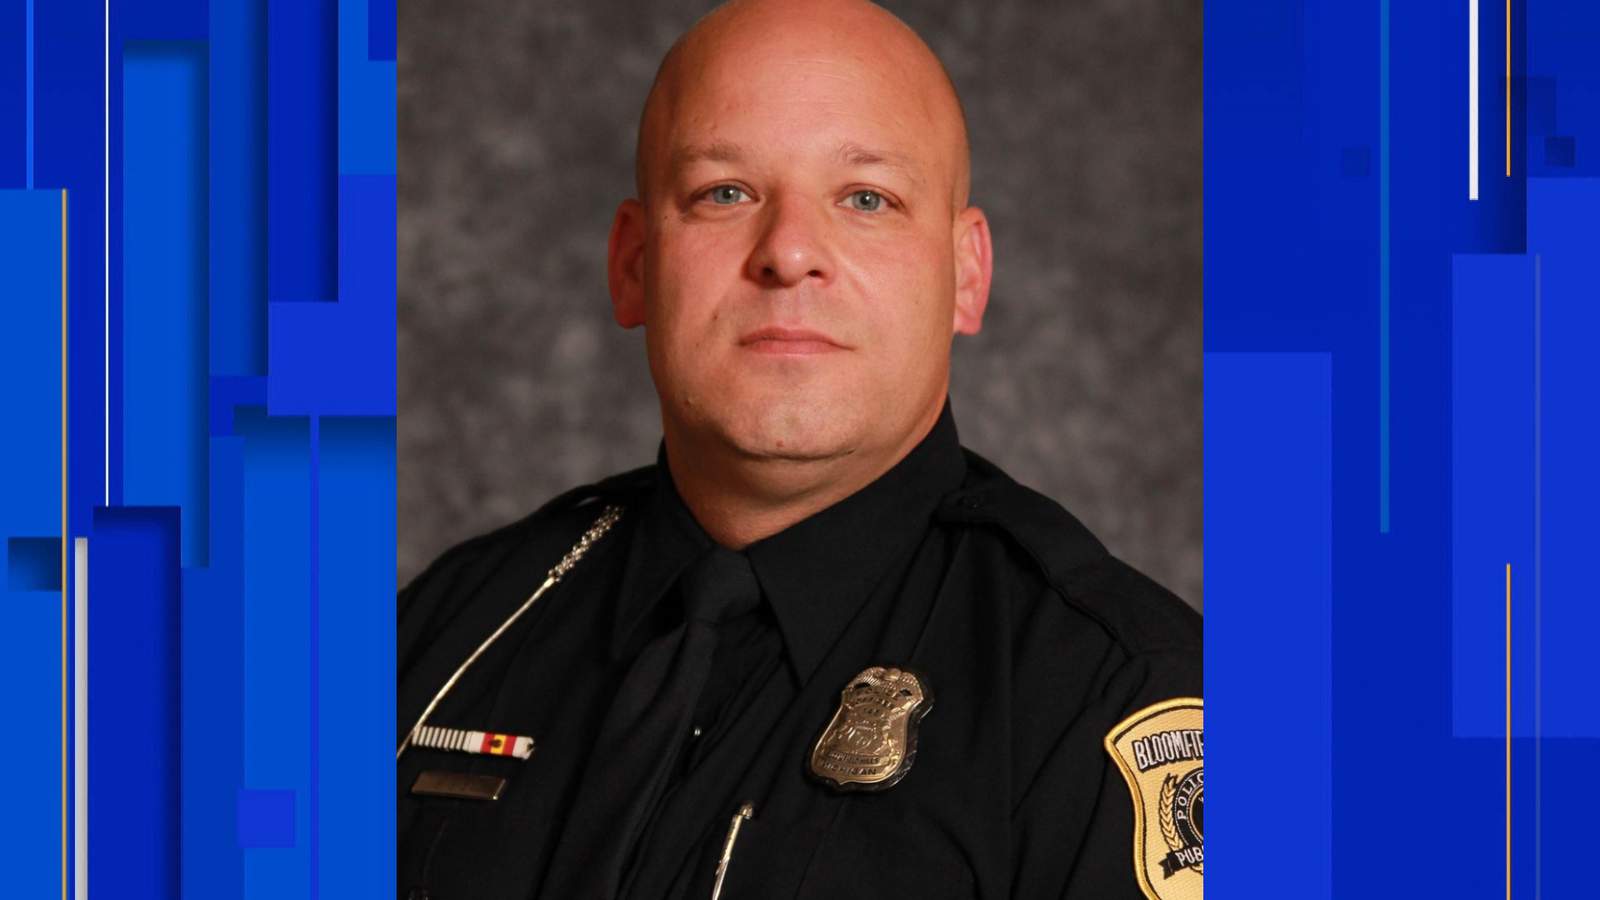 Bloomfield Hills sergeant dies from heart attack after cutting tree, department says